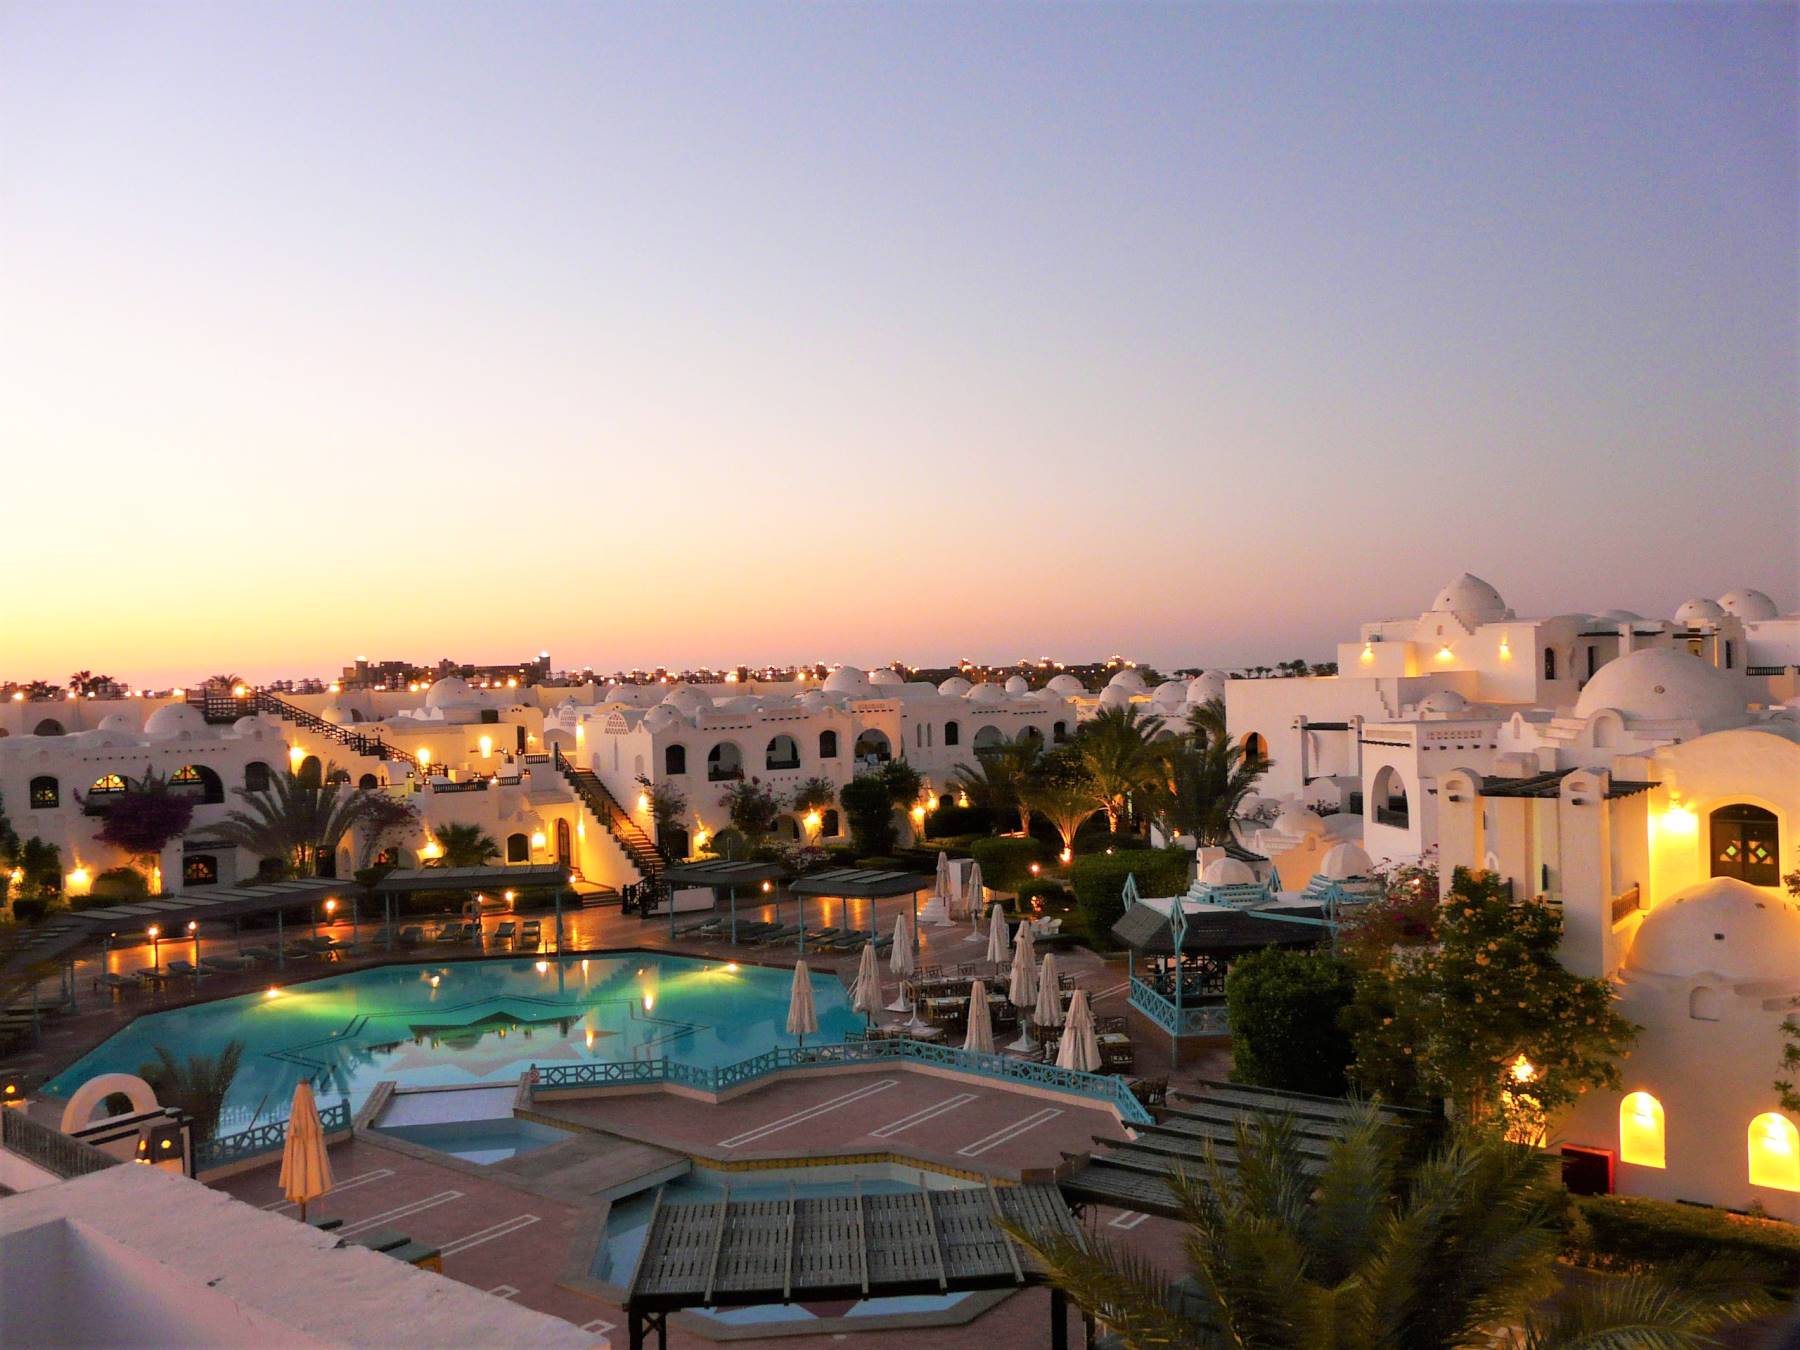 https://endlesstraveldestinations.com/wp-content/uploads/2021/06/The-Best-Things-to-Do-in-Hurghada-at-Night-Endless-Travel-Destinations.jpg